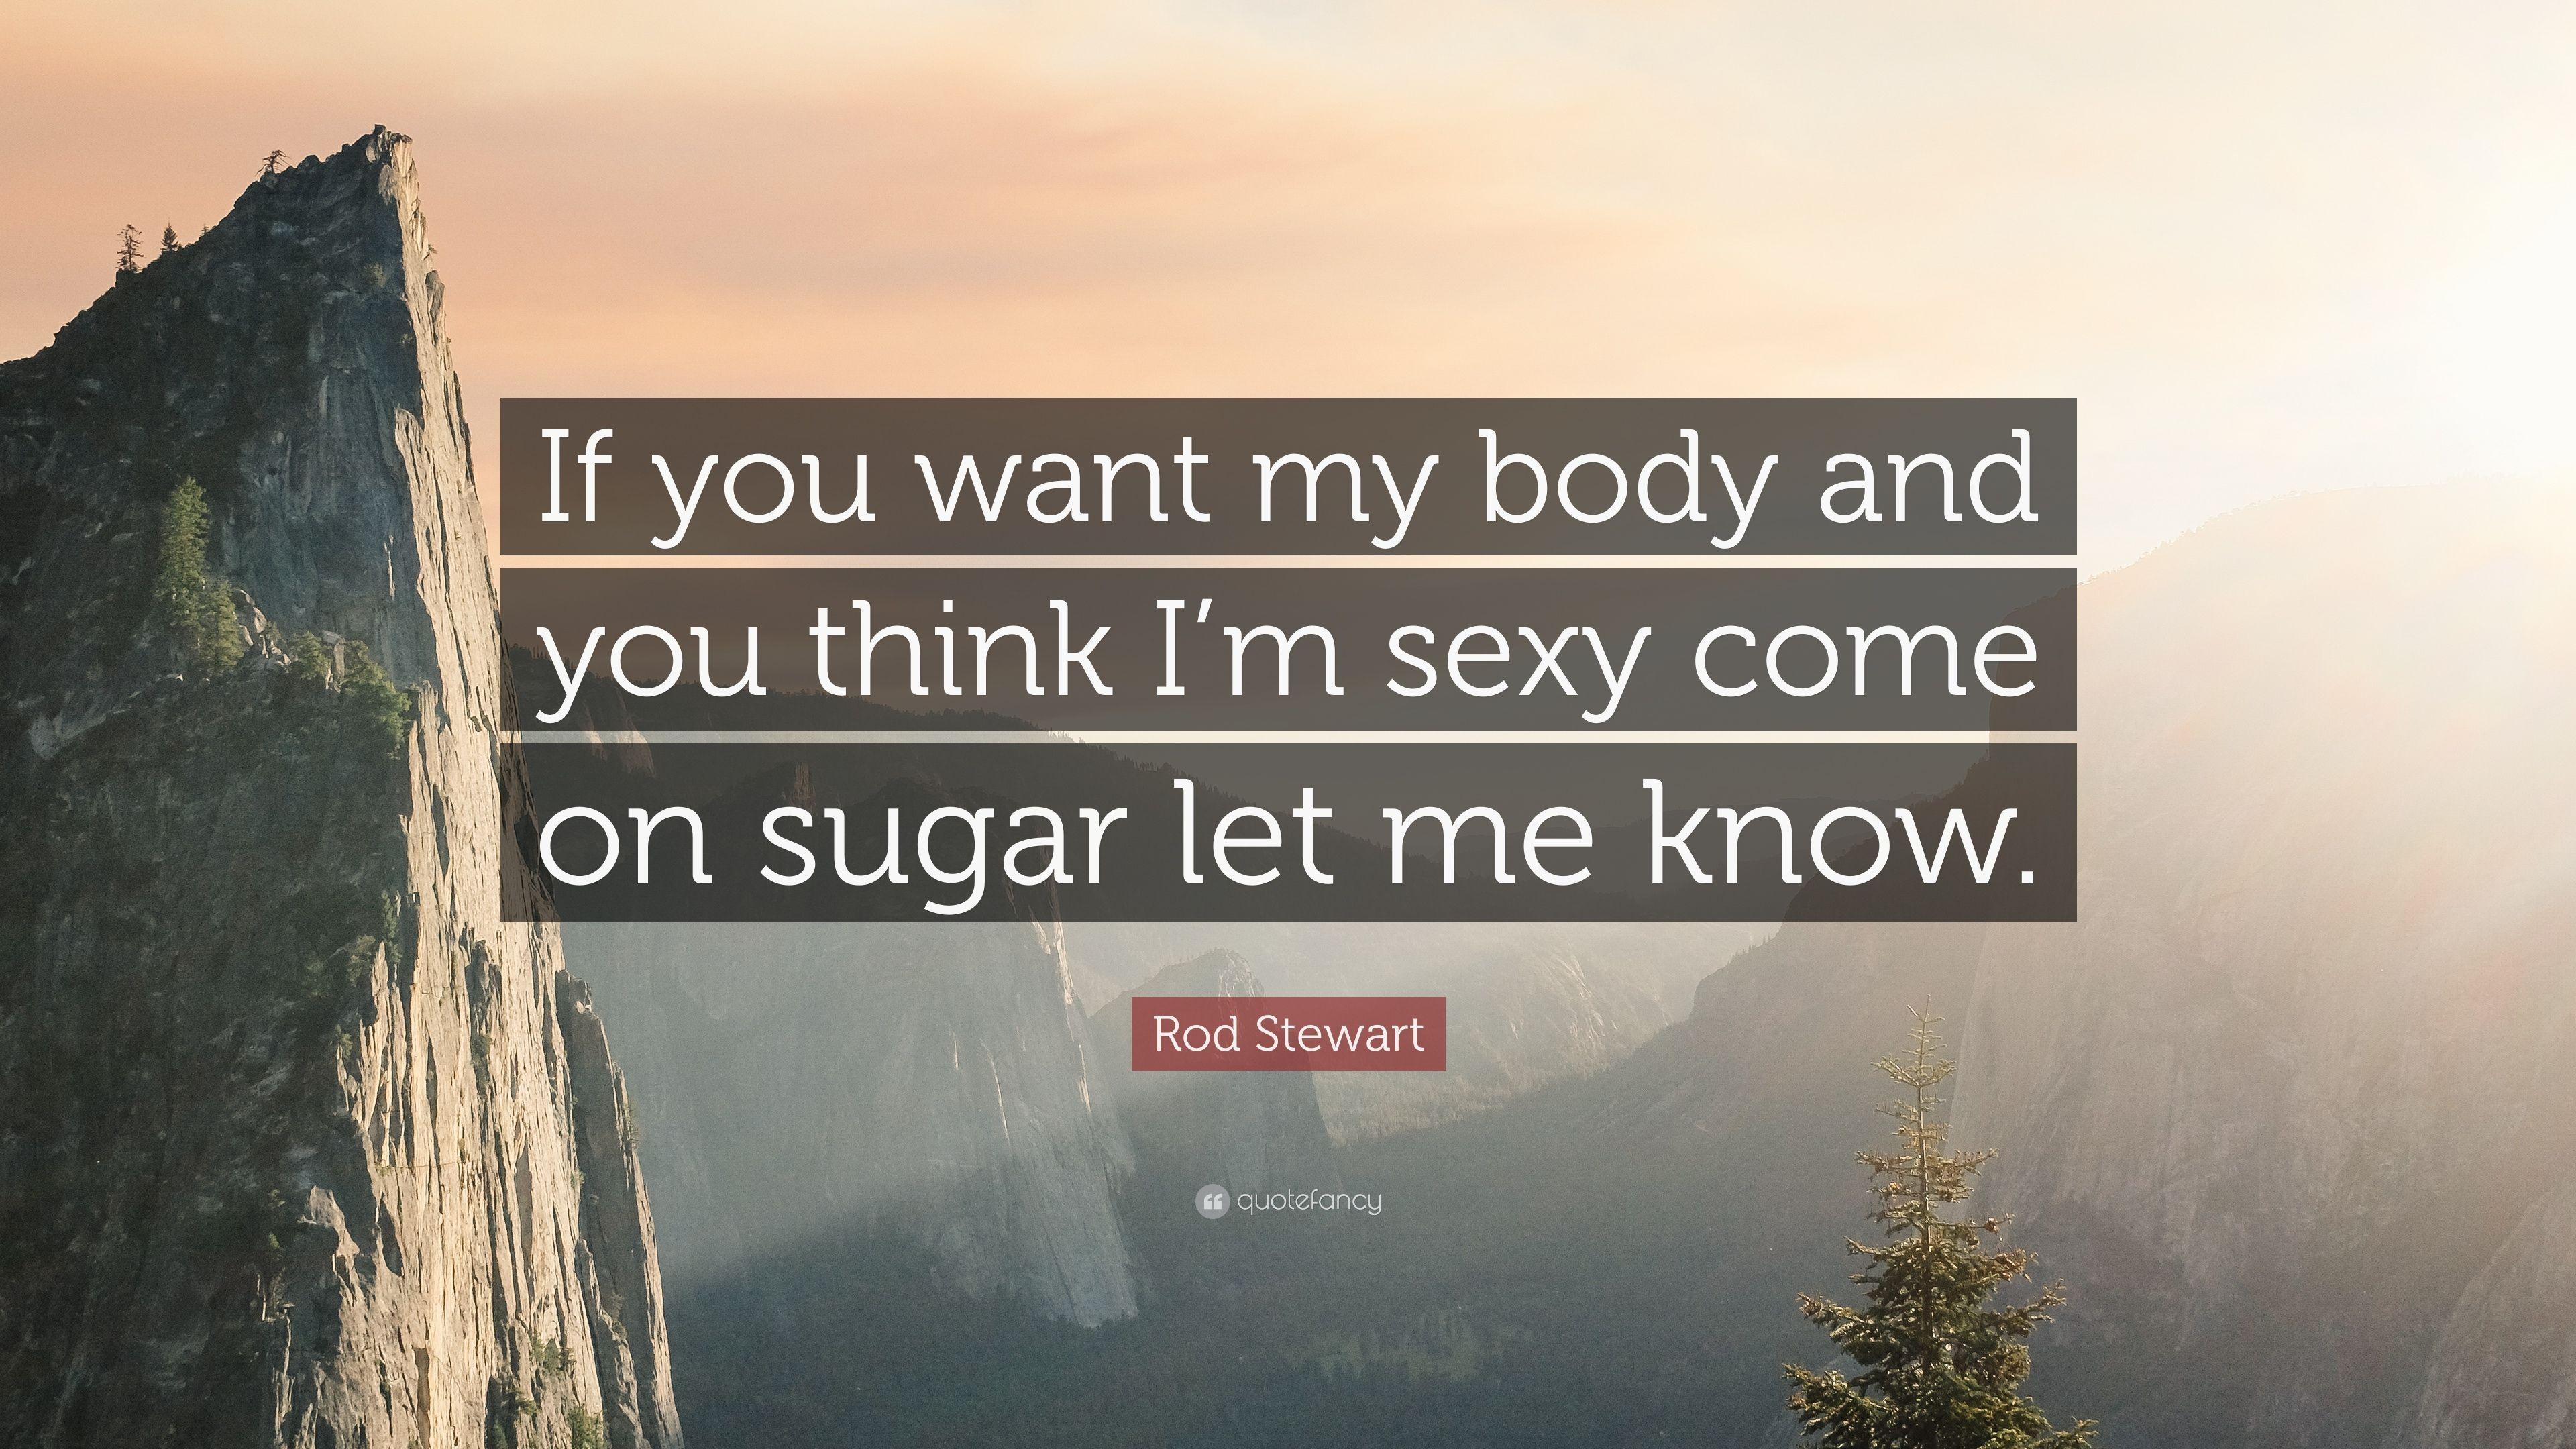 Rod Stewart Quote: “If you want my body and you think I'm